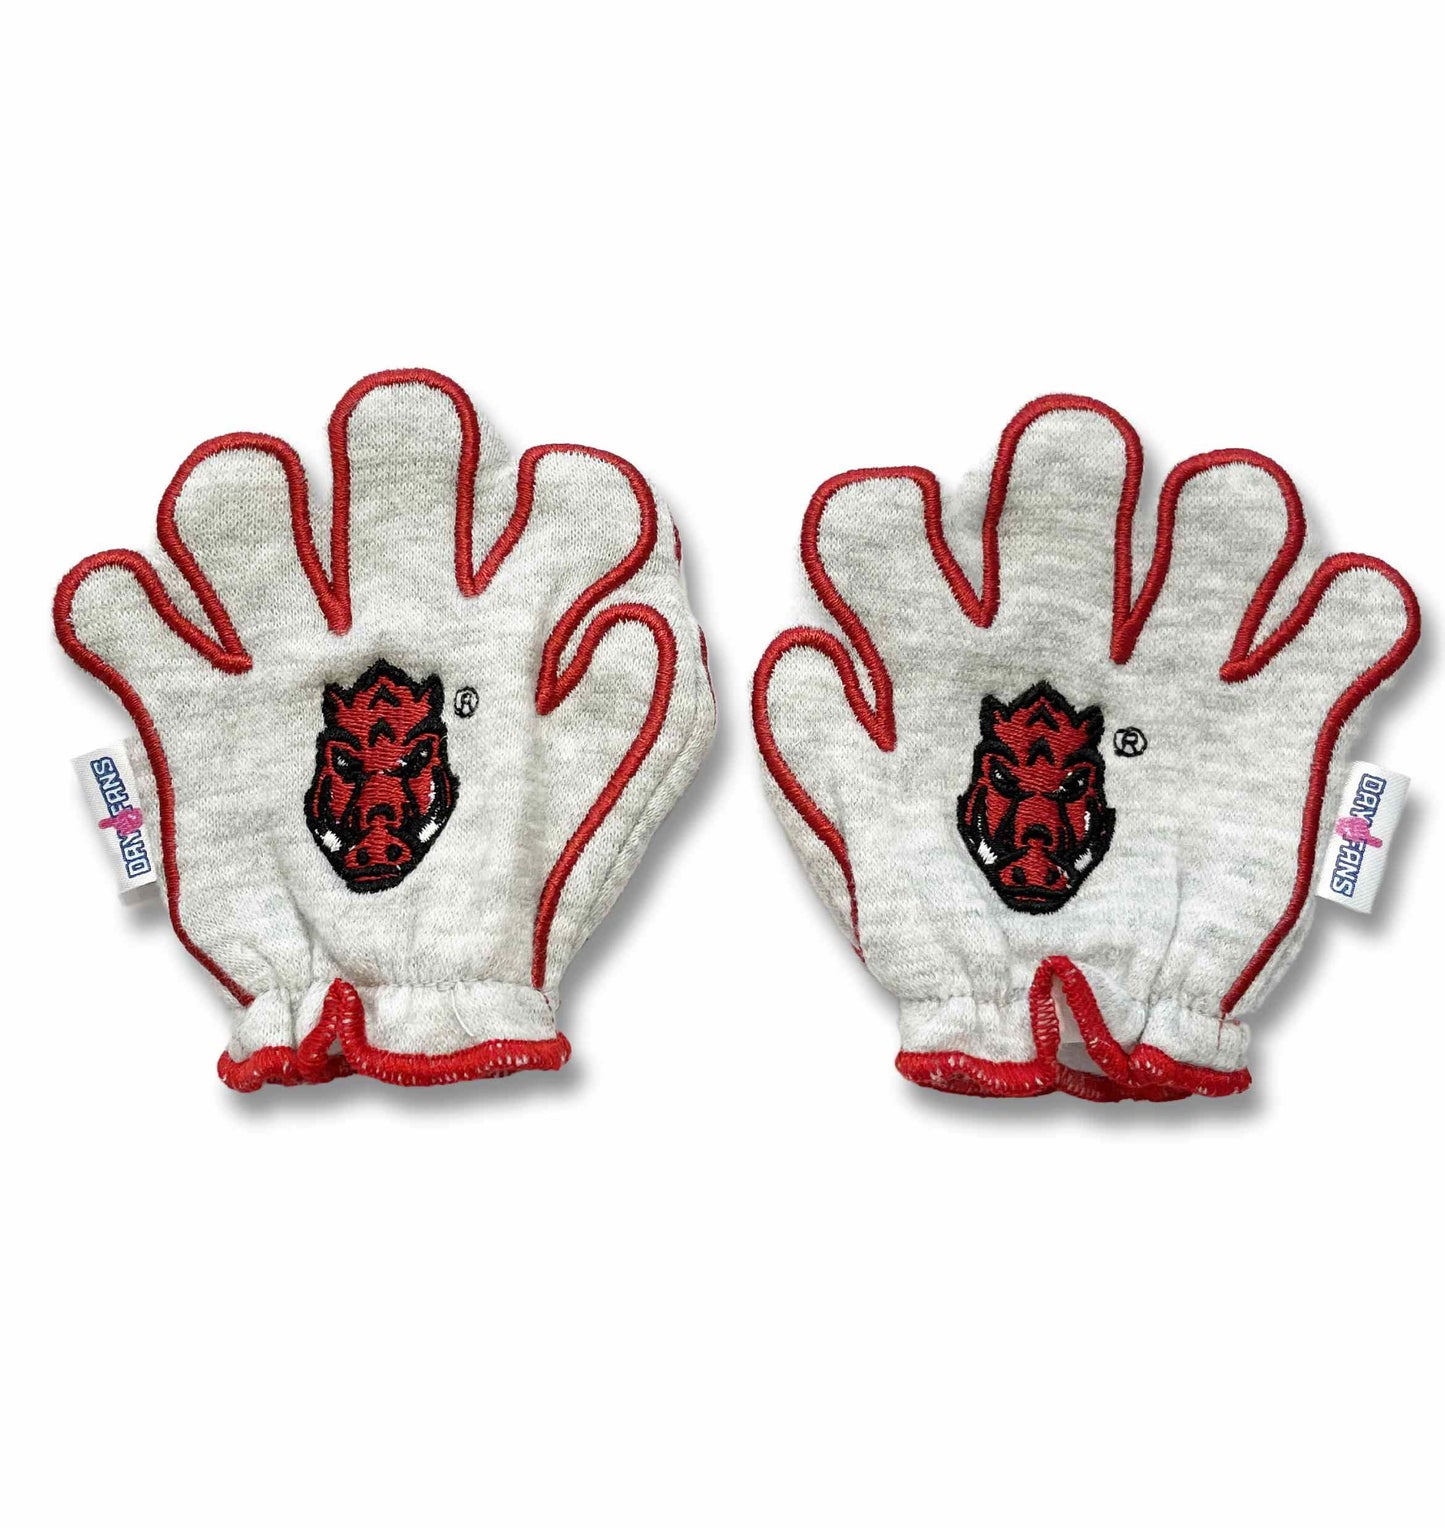 Arkansas Wooo Pig FanMitts Baby Mittens Heathered Gray Back Pair